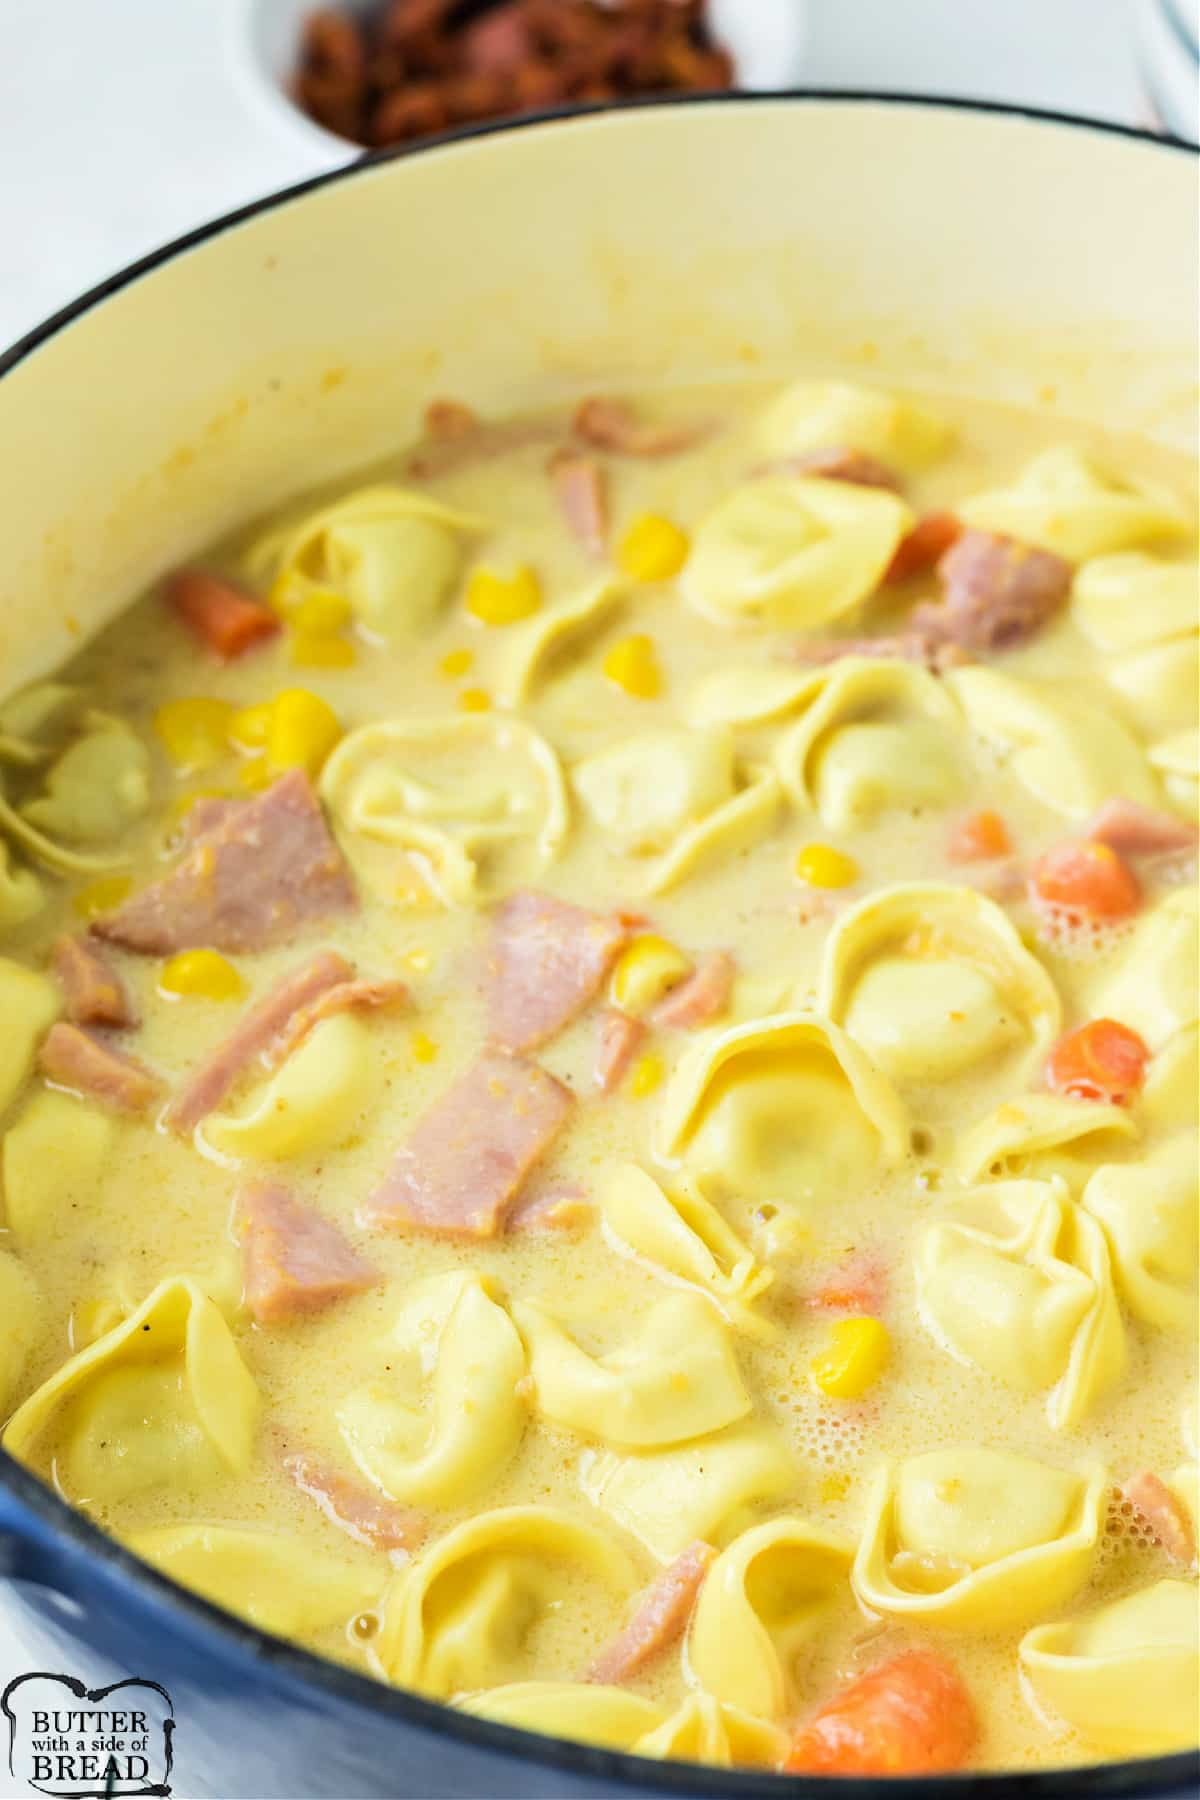 Soup with pasta, ham, carrots, corn and cheese